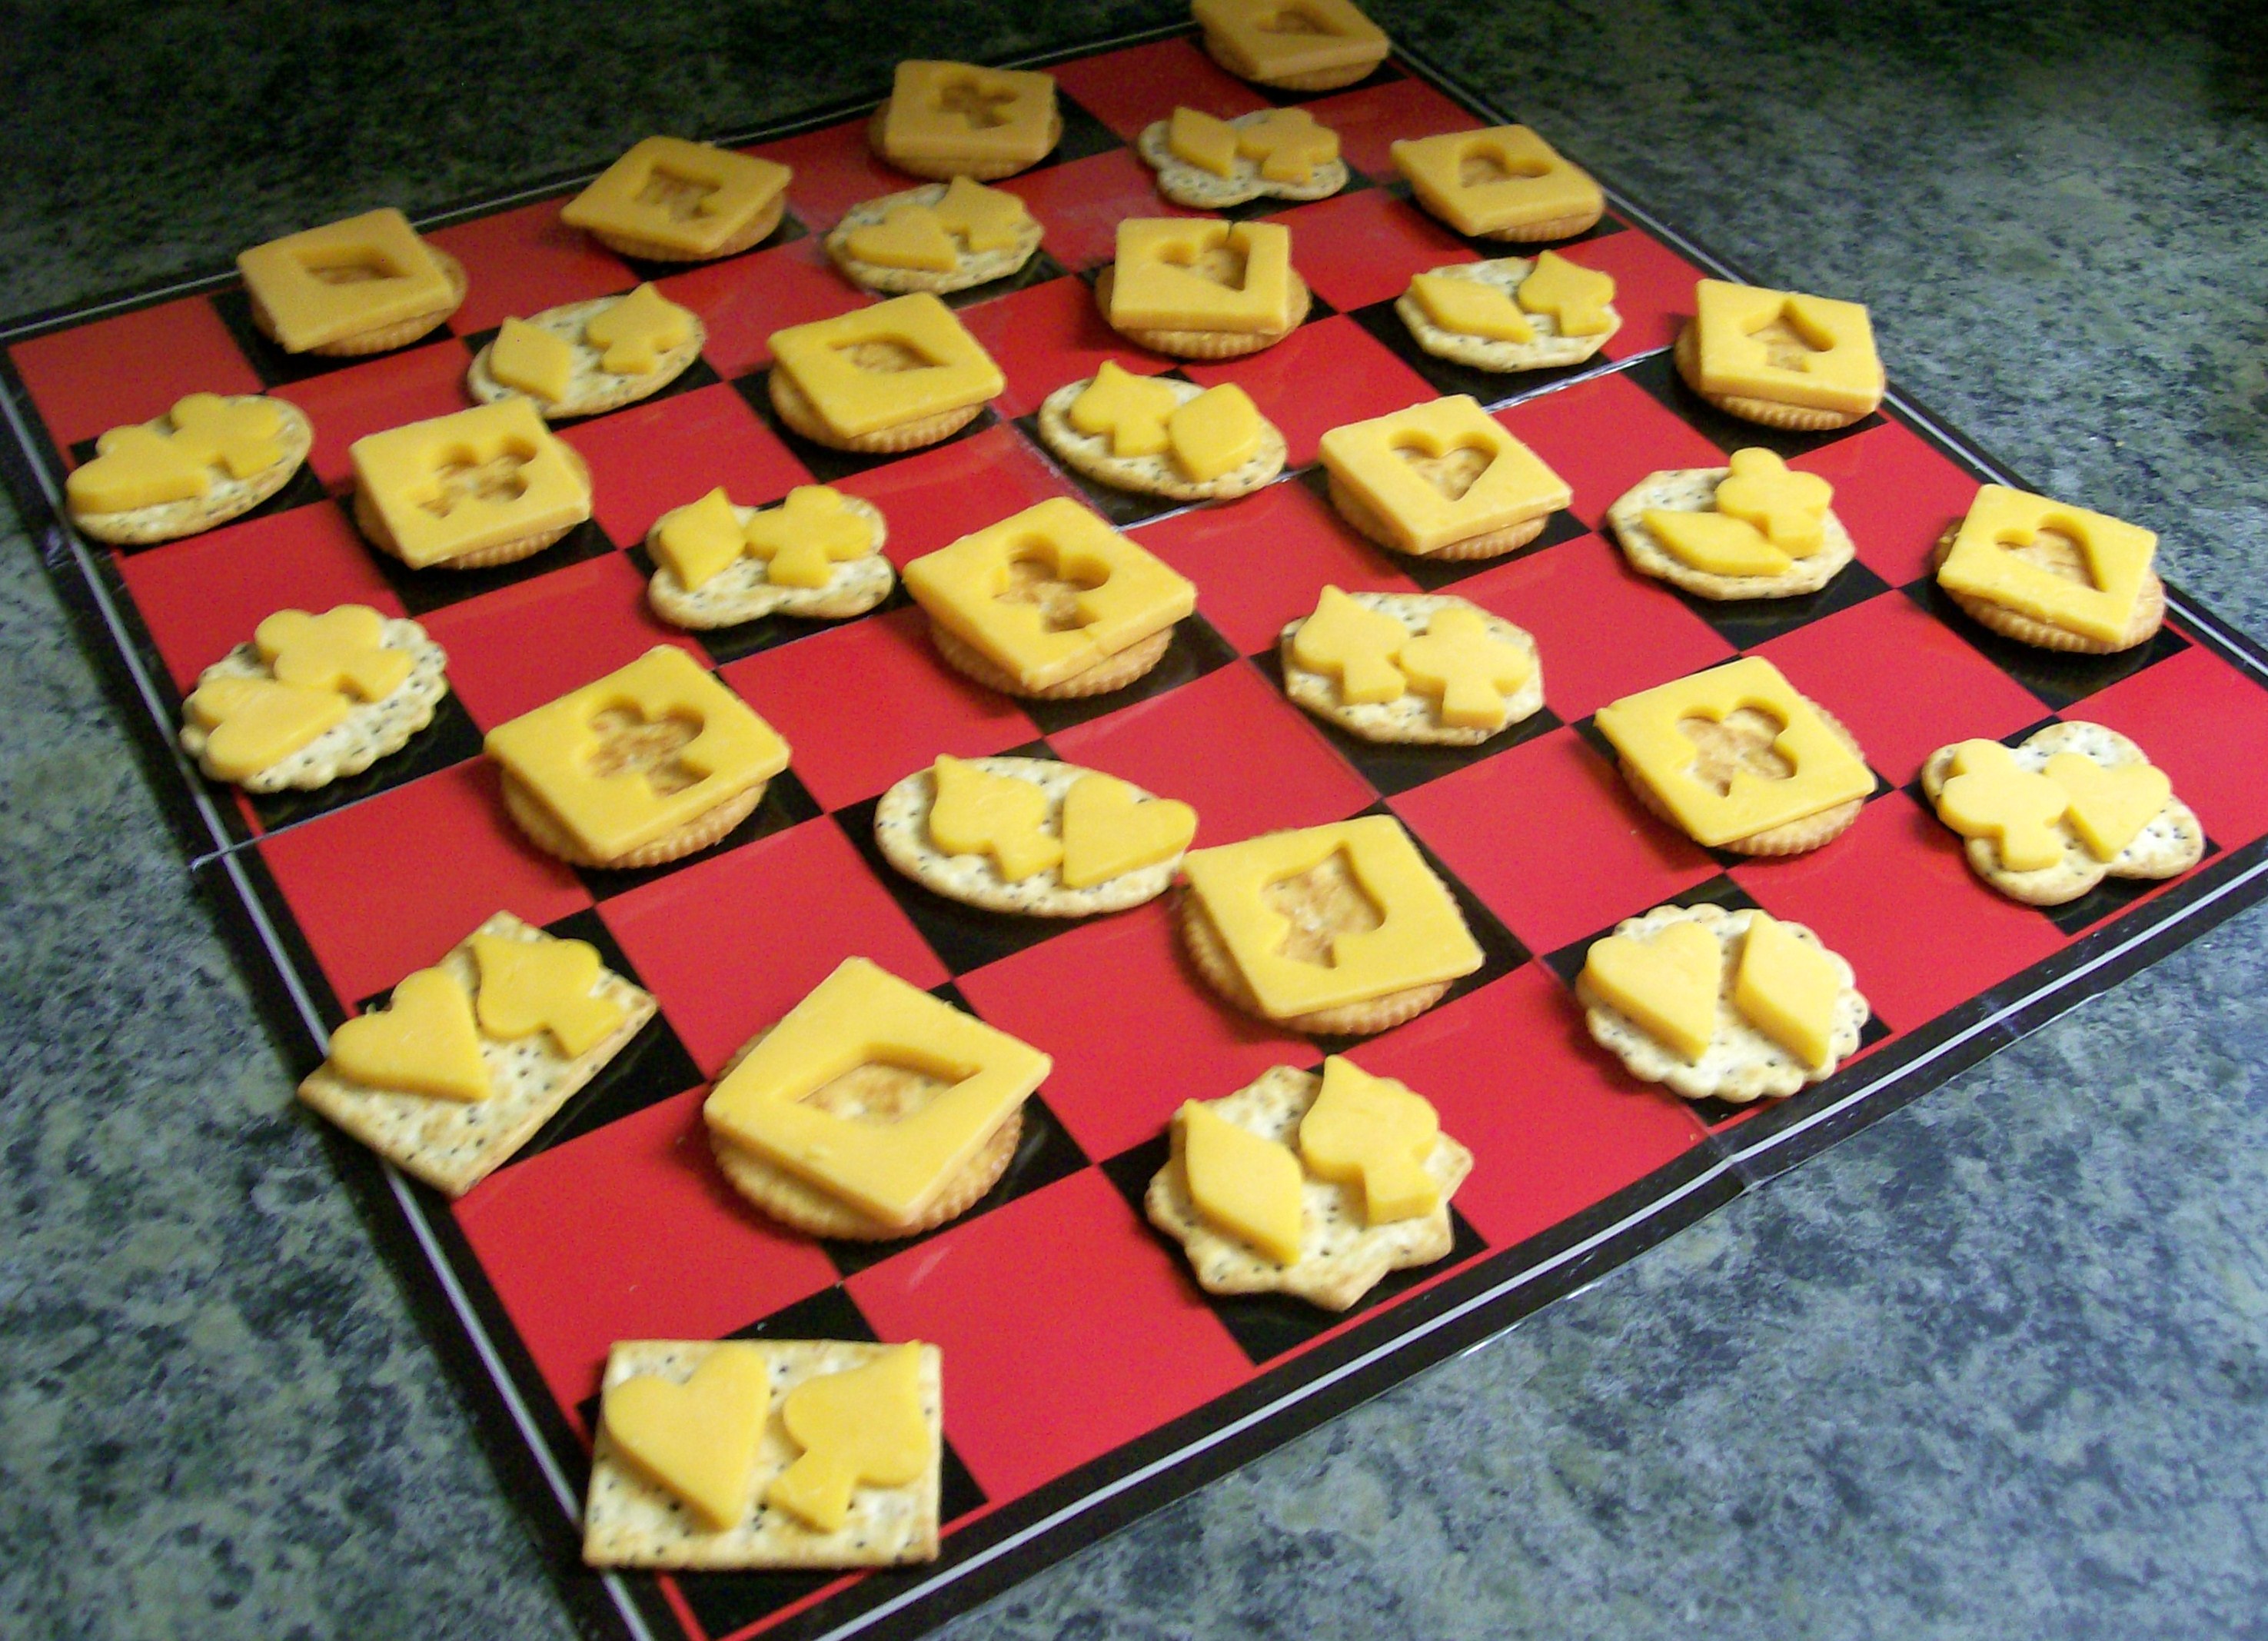 Game Night Snack: Cheese Crackers that Suit